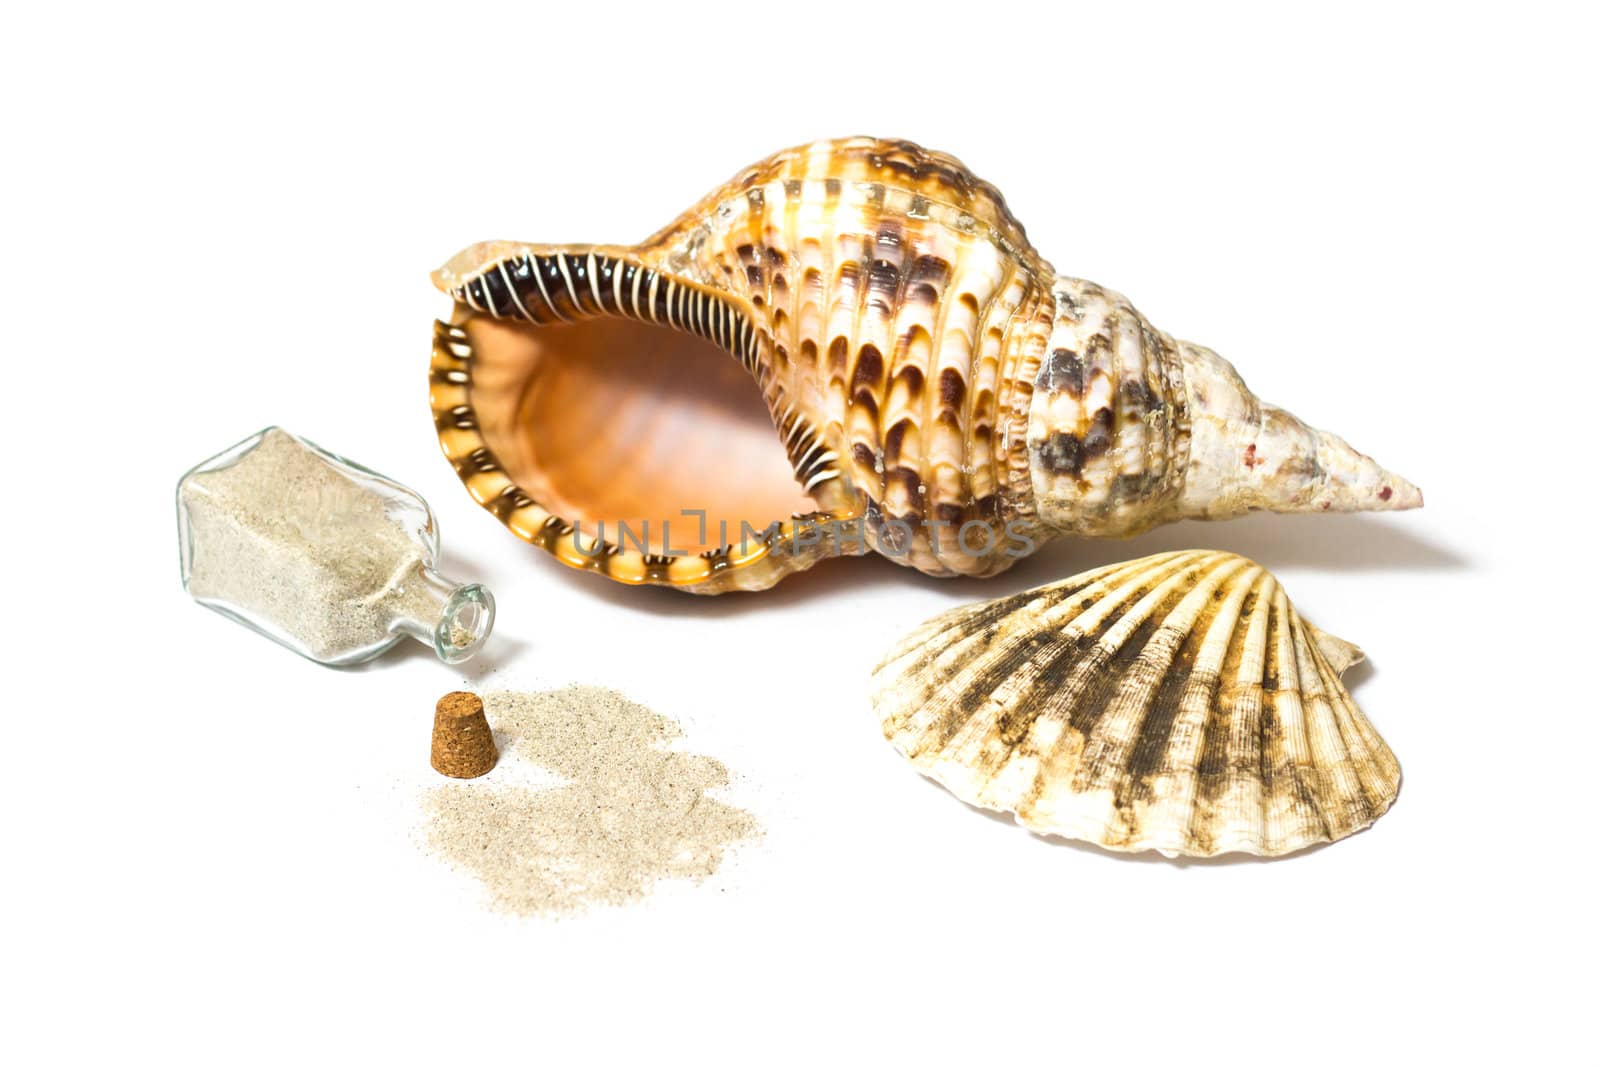 Marine sea shells and sand bottle by doble.d